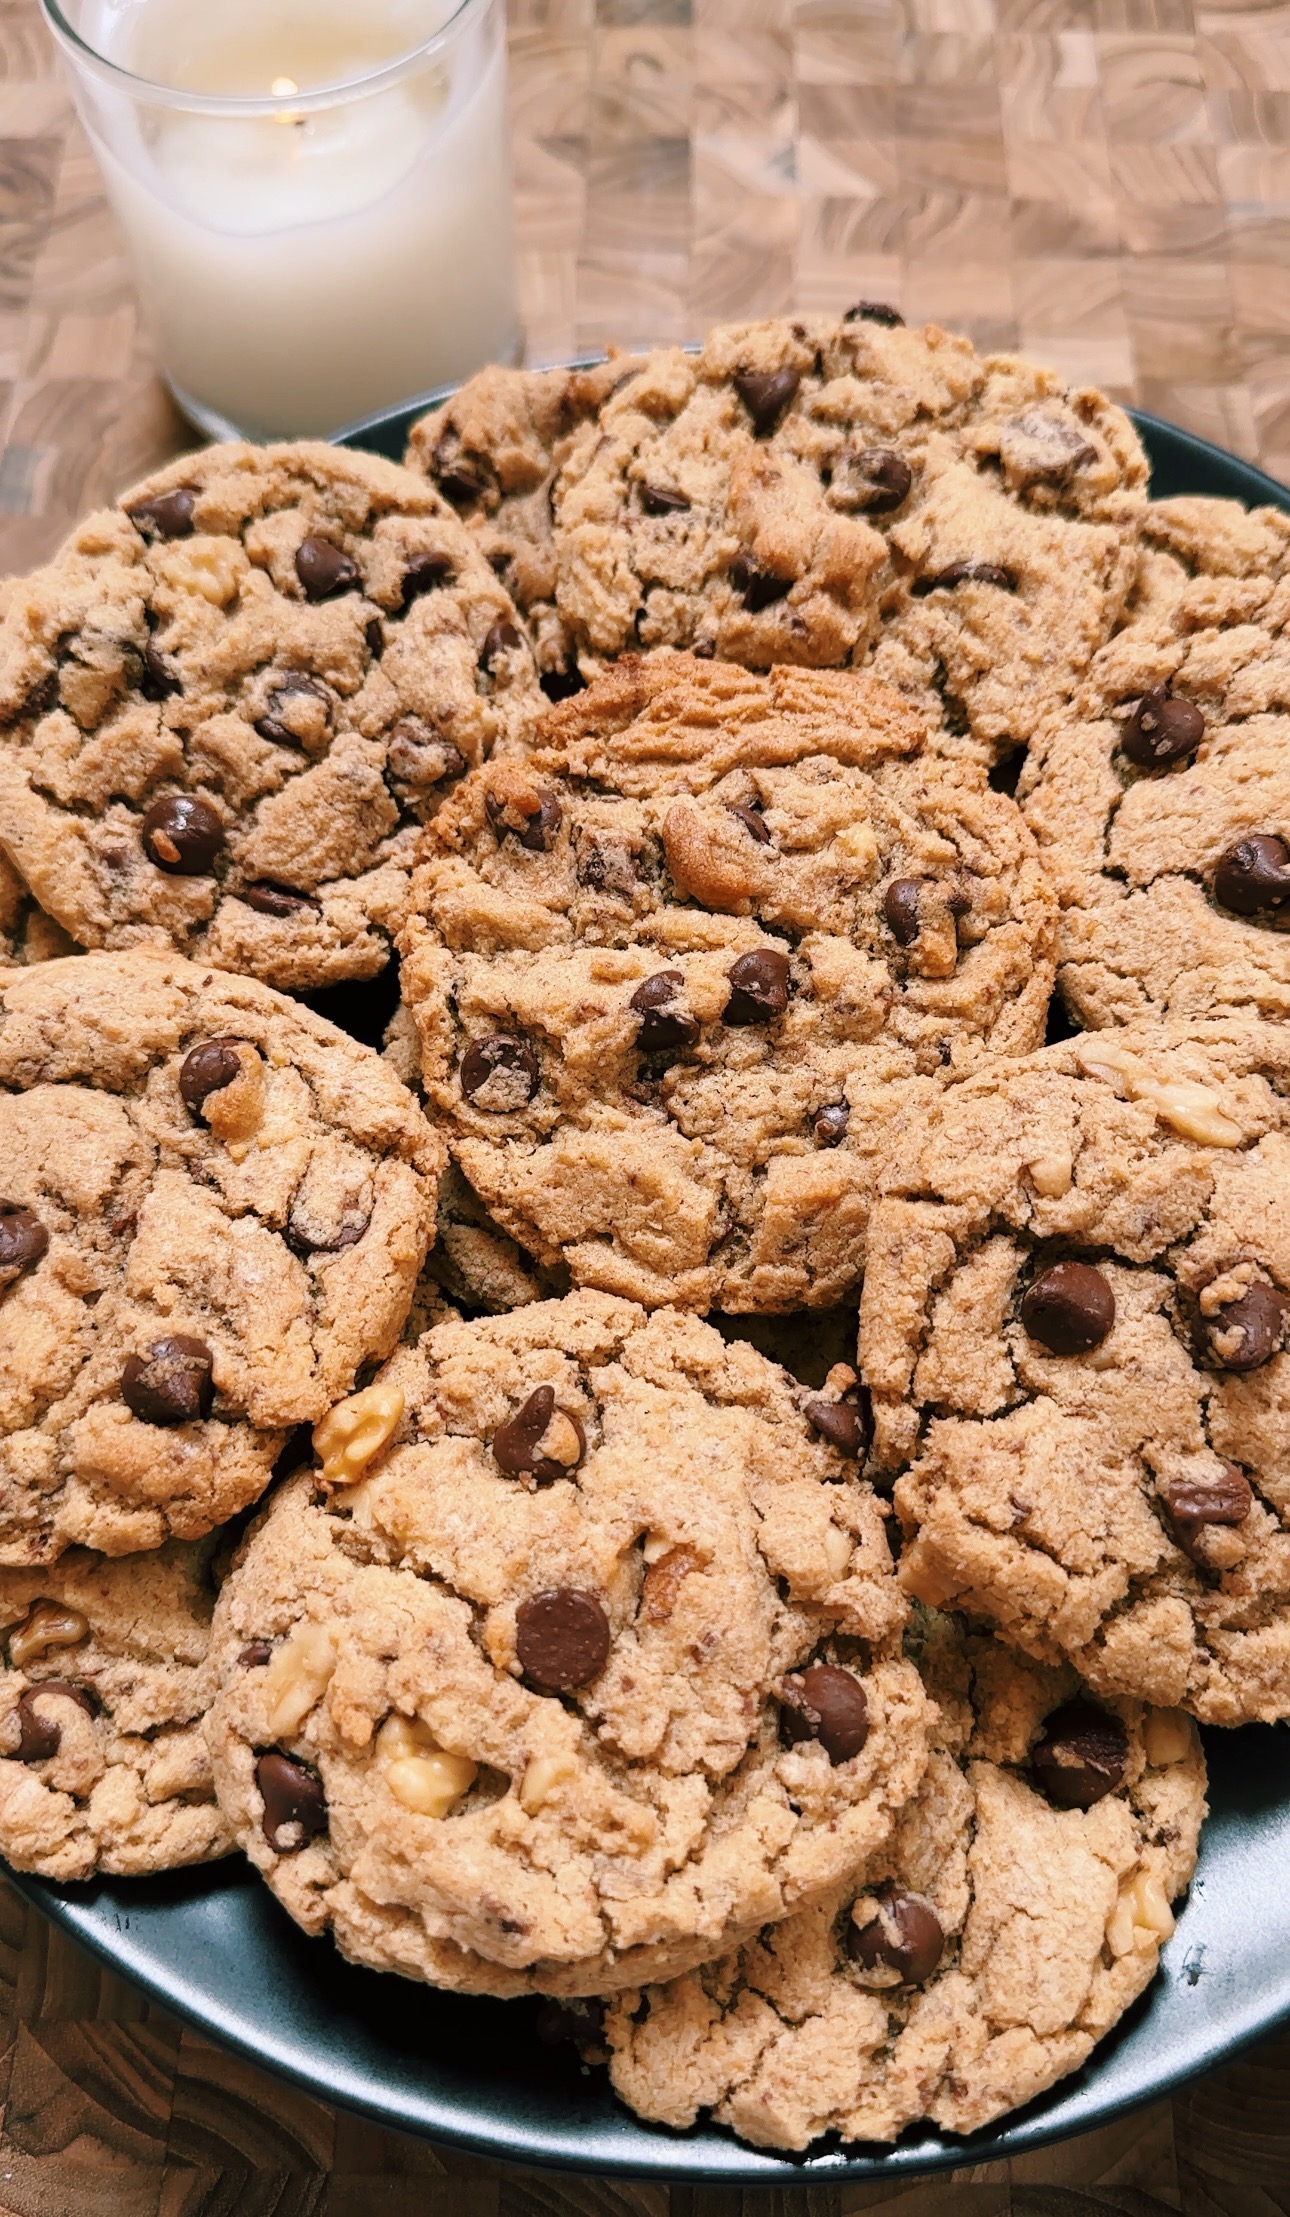 Neiman Marcus Chocolate Chip Cookie Recipe - Kelsey's Food Reviews